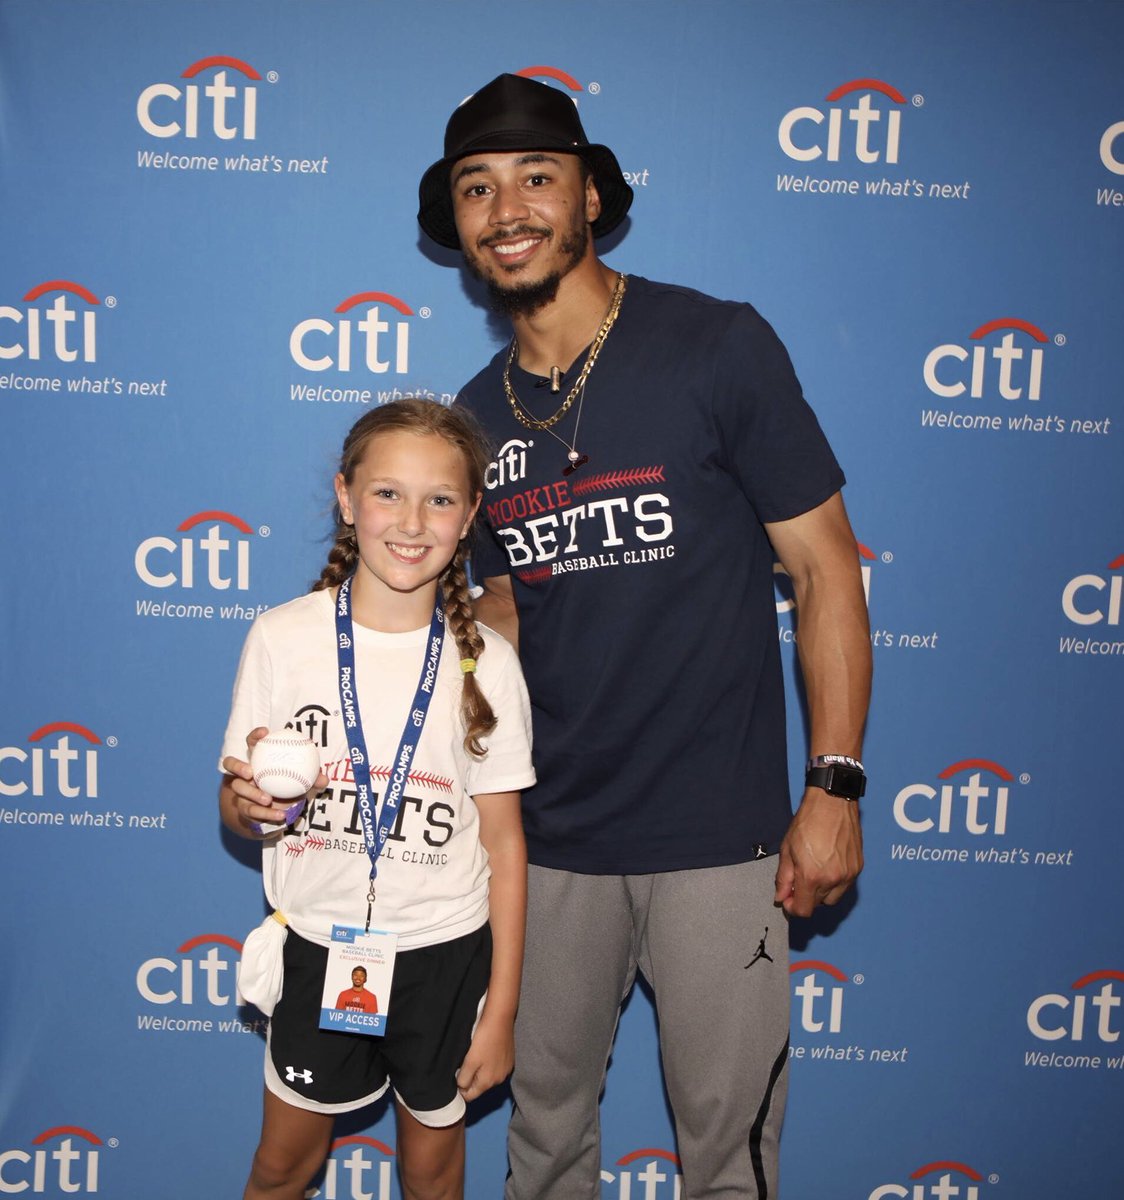 And a special thanks to @CitiPrivatePass for supporting my Baseball Clinic! #CloserToPro